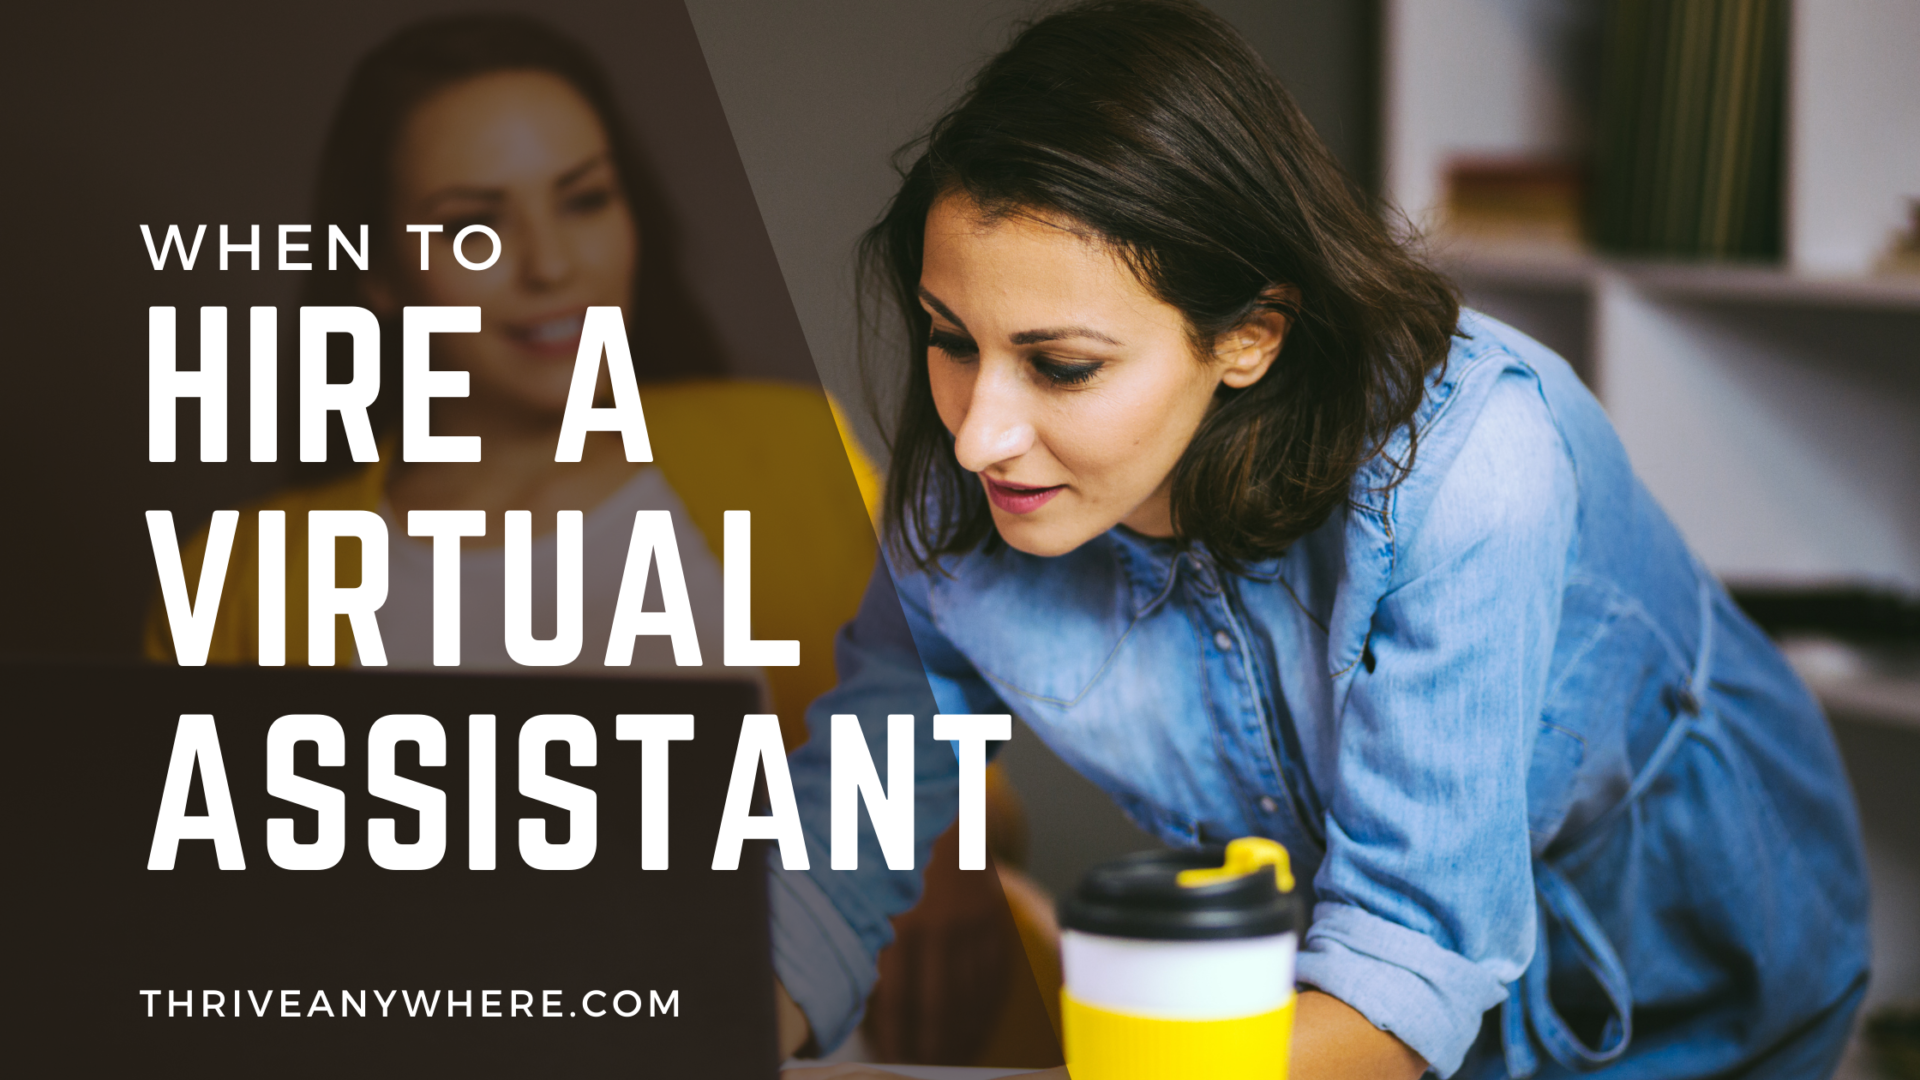 When To Hire A Virtual Assistant